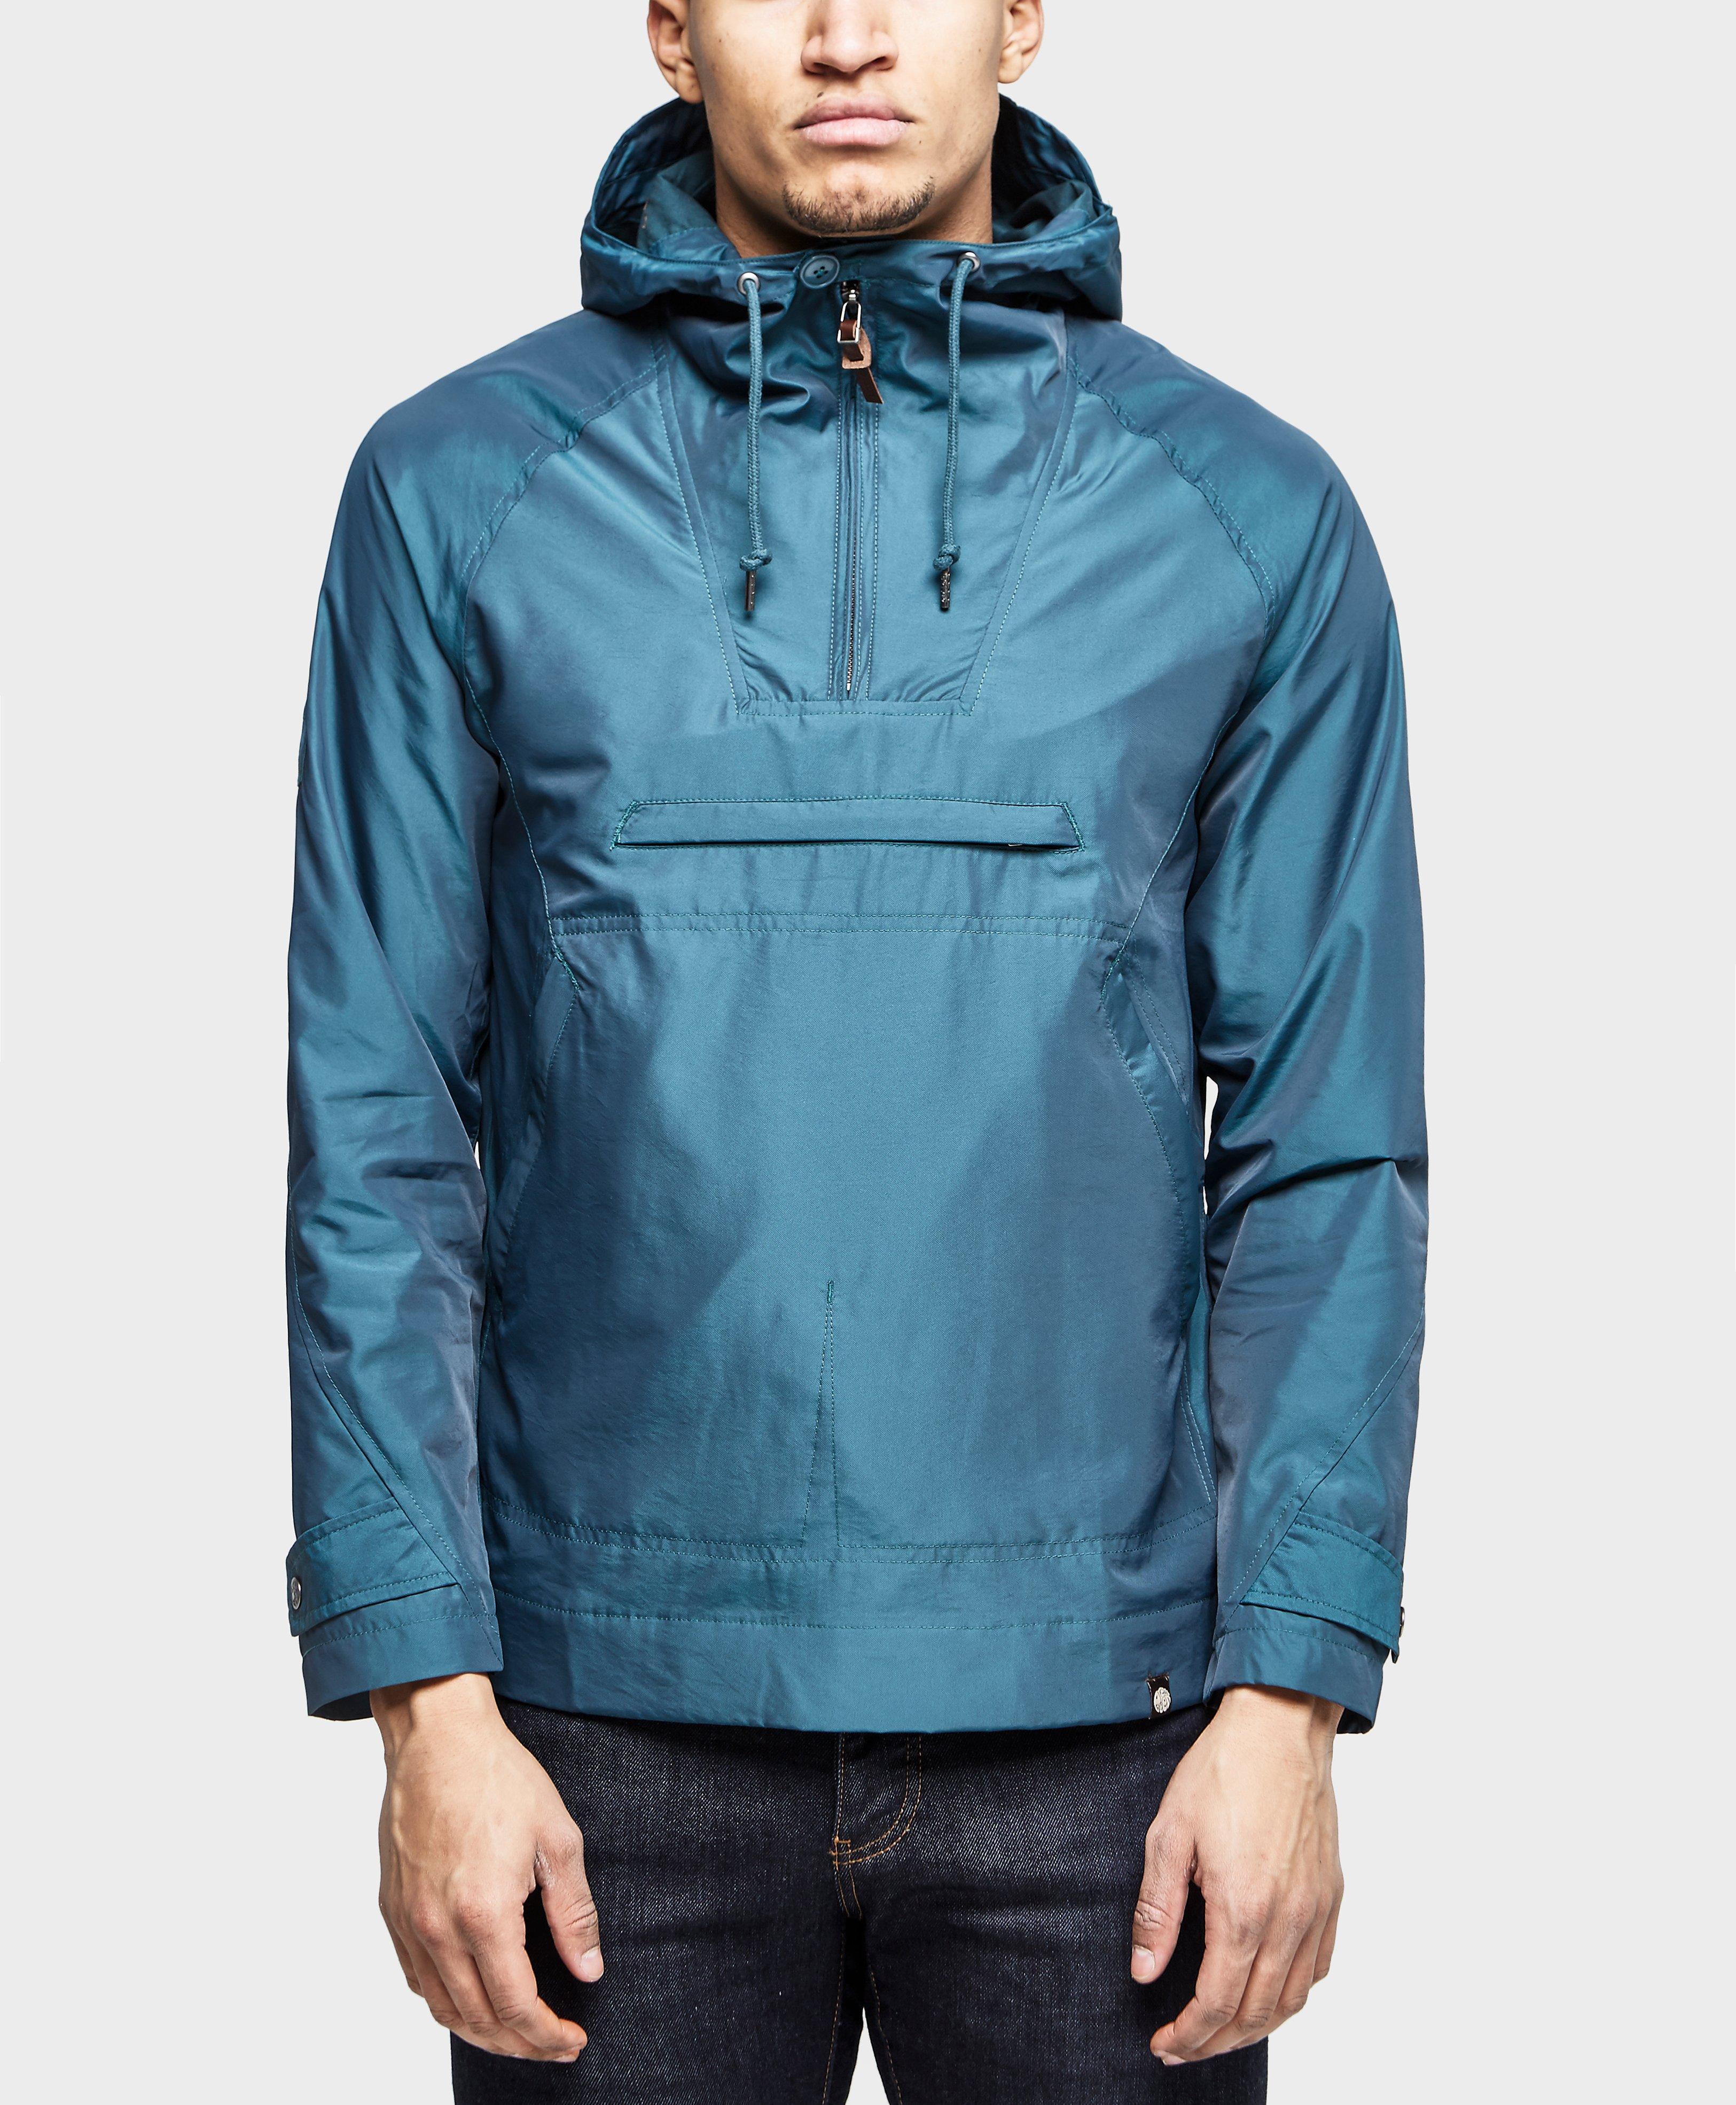 Lyst - Pretty Green Overhead Parka Jacket - Exclusive in Blue for Men